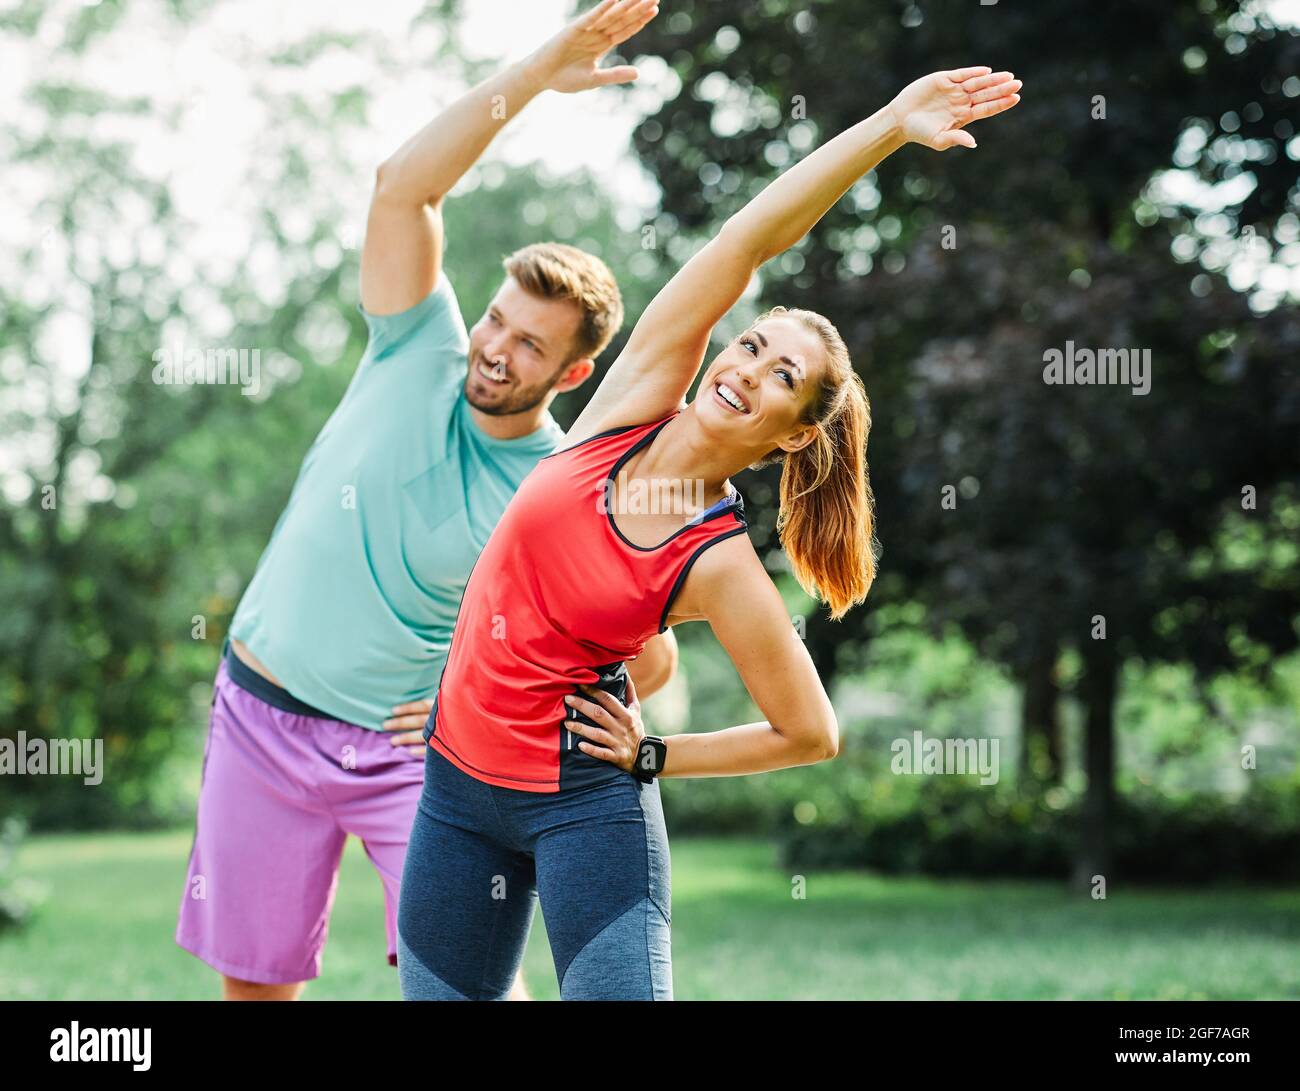 fitness woman park exercise lifestyle outdoor sport healthy couple stretching young fit training athlete Stock Photo